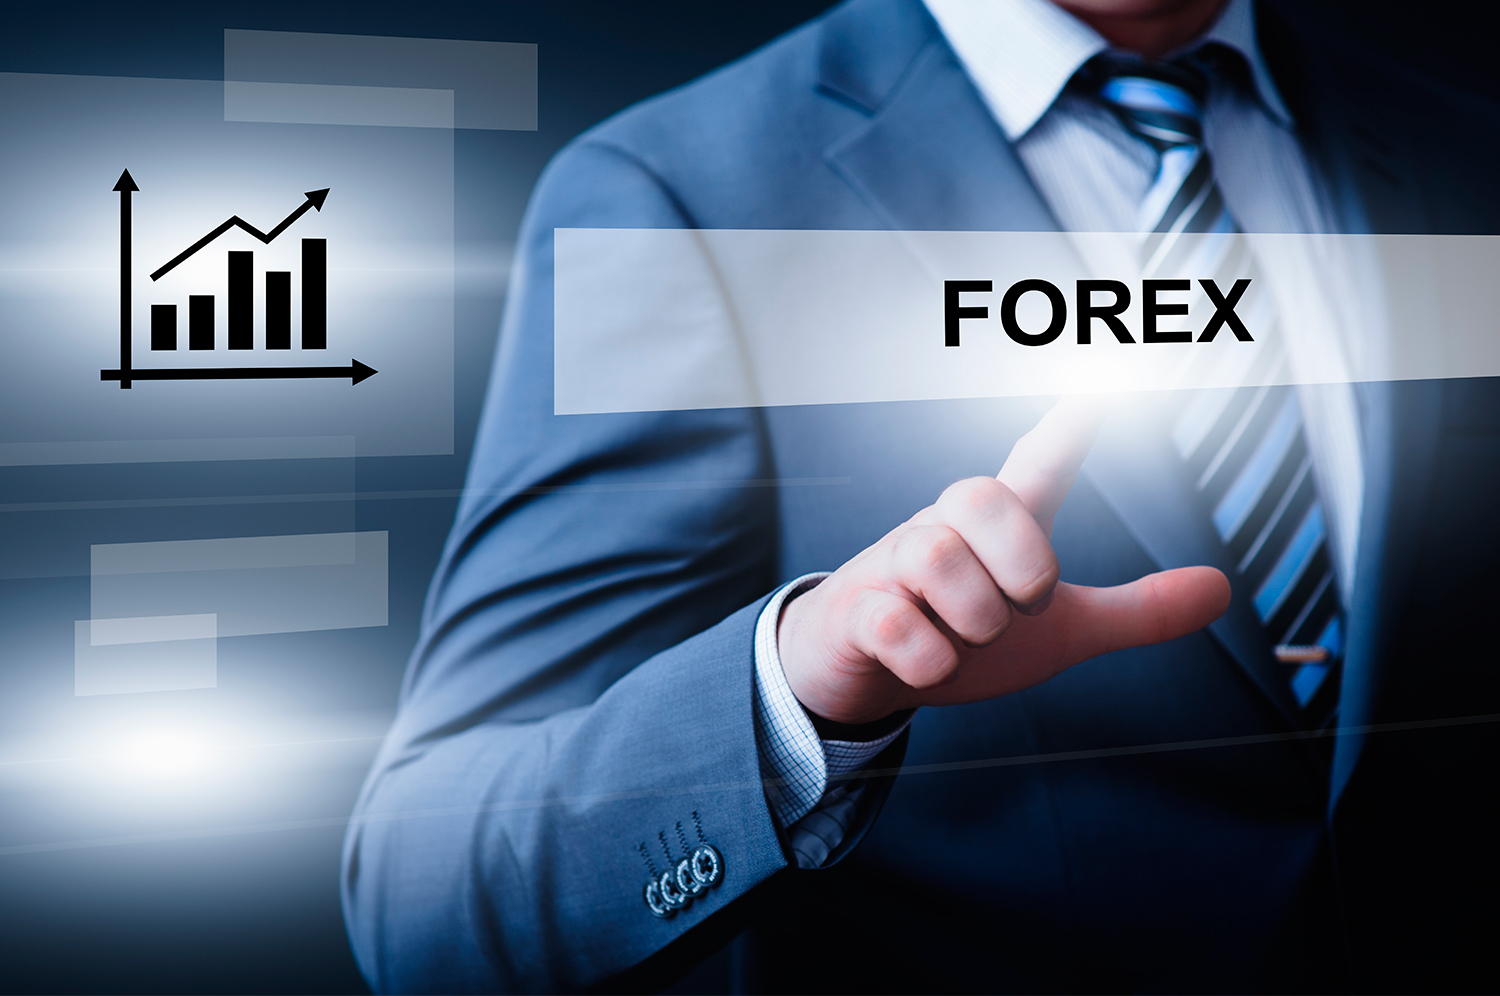 Belief forex trading